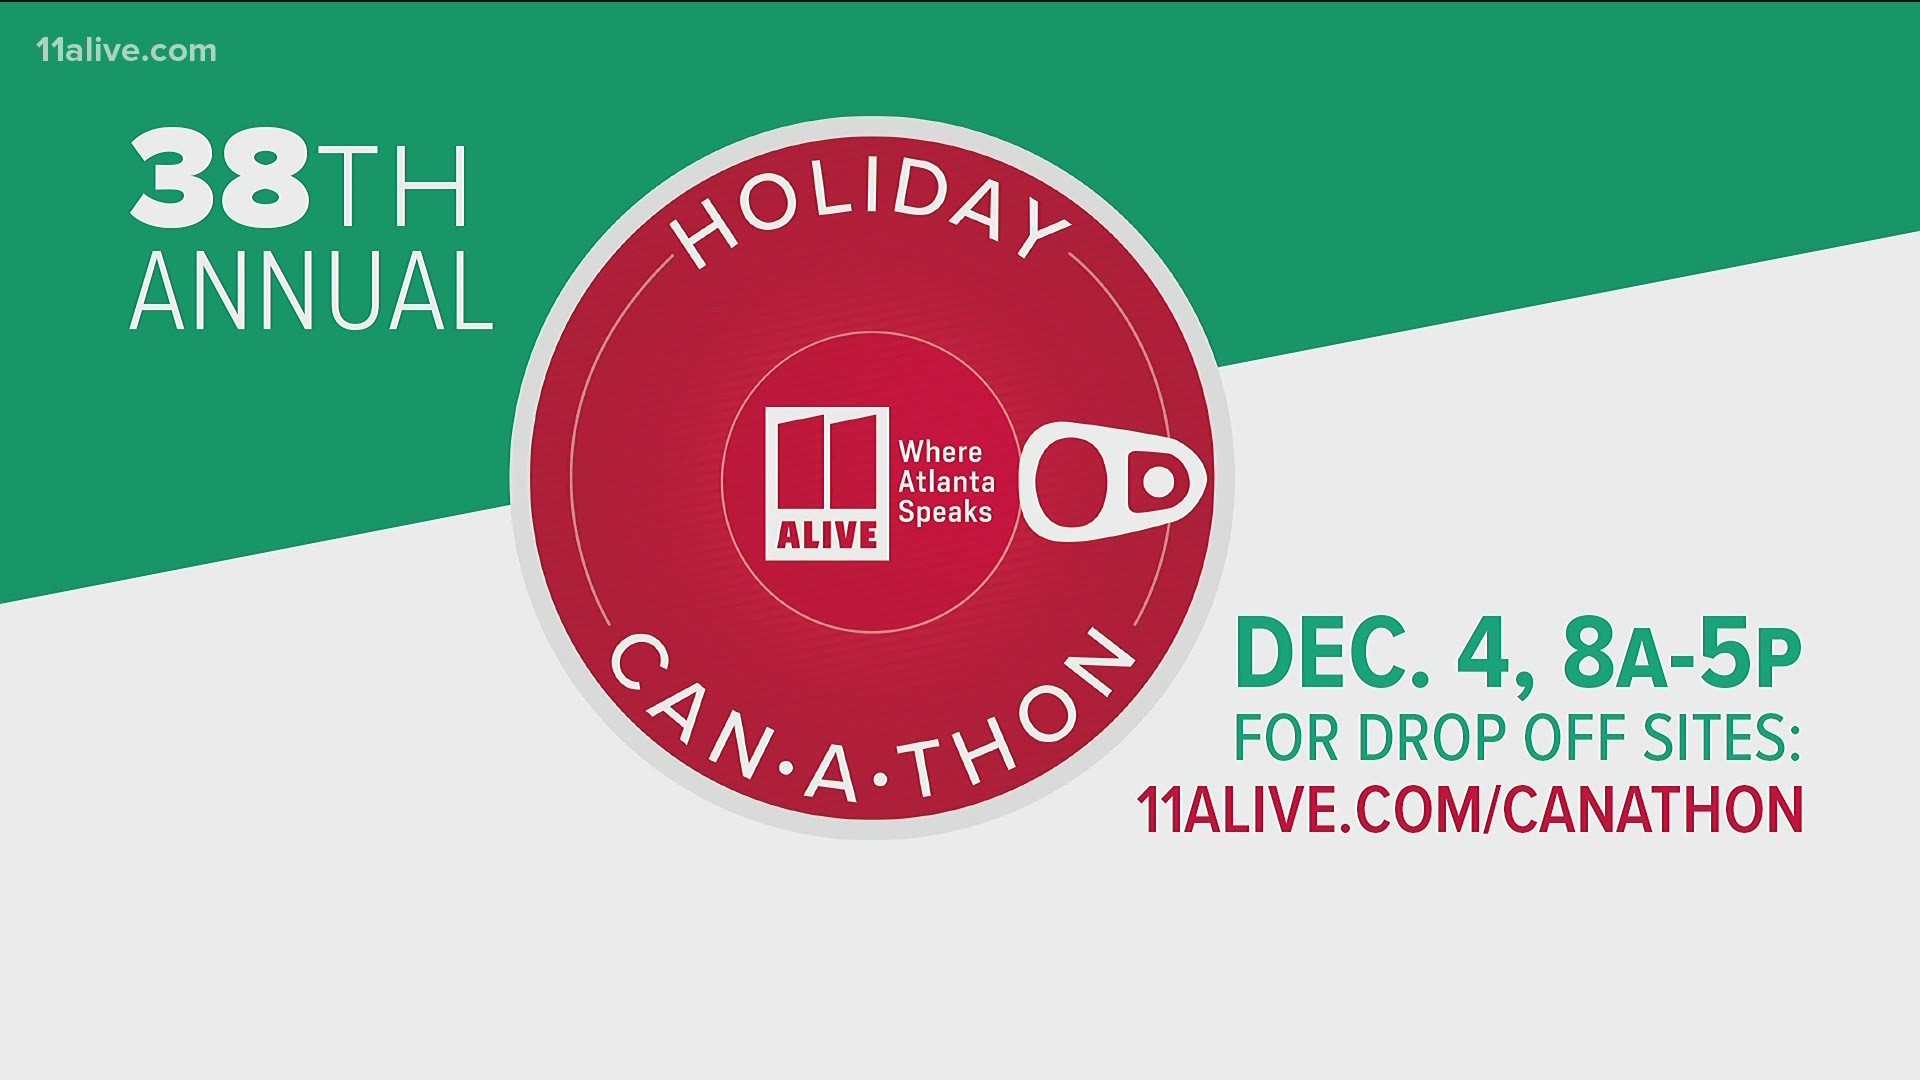 Those donations will help stock The Salvation Army’s 13 metro Atlanta-area food pantries.